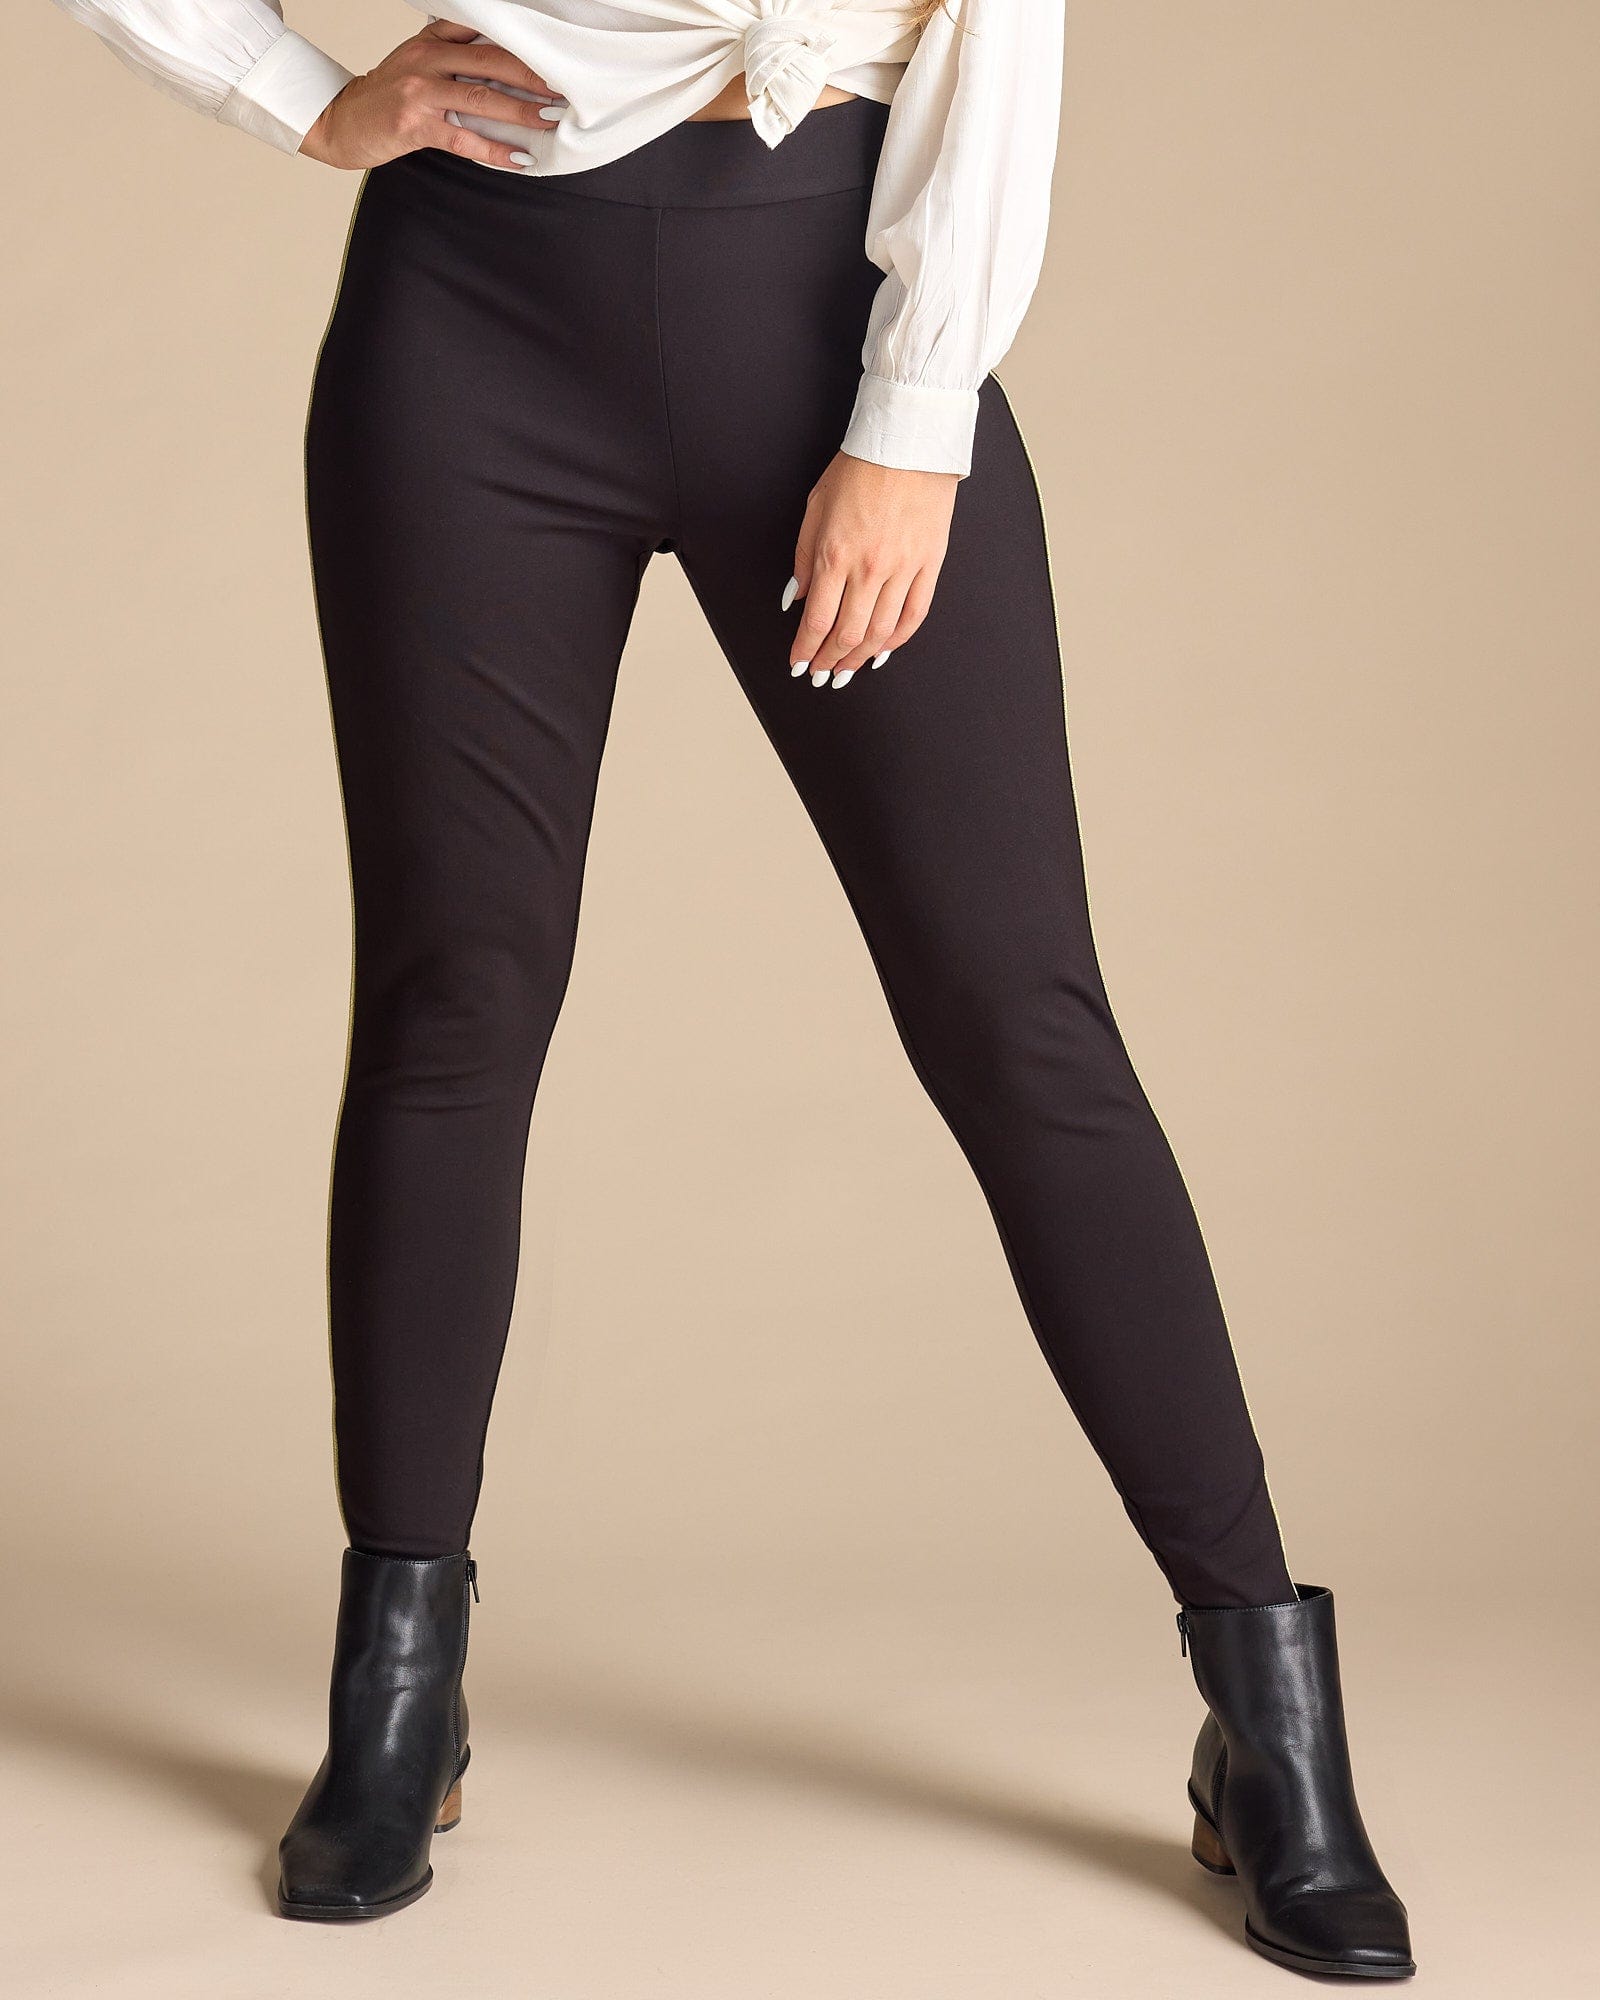 Woman in black leggings with gold piping along sides